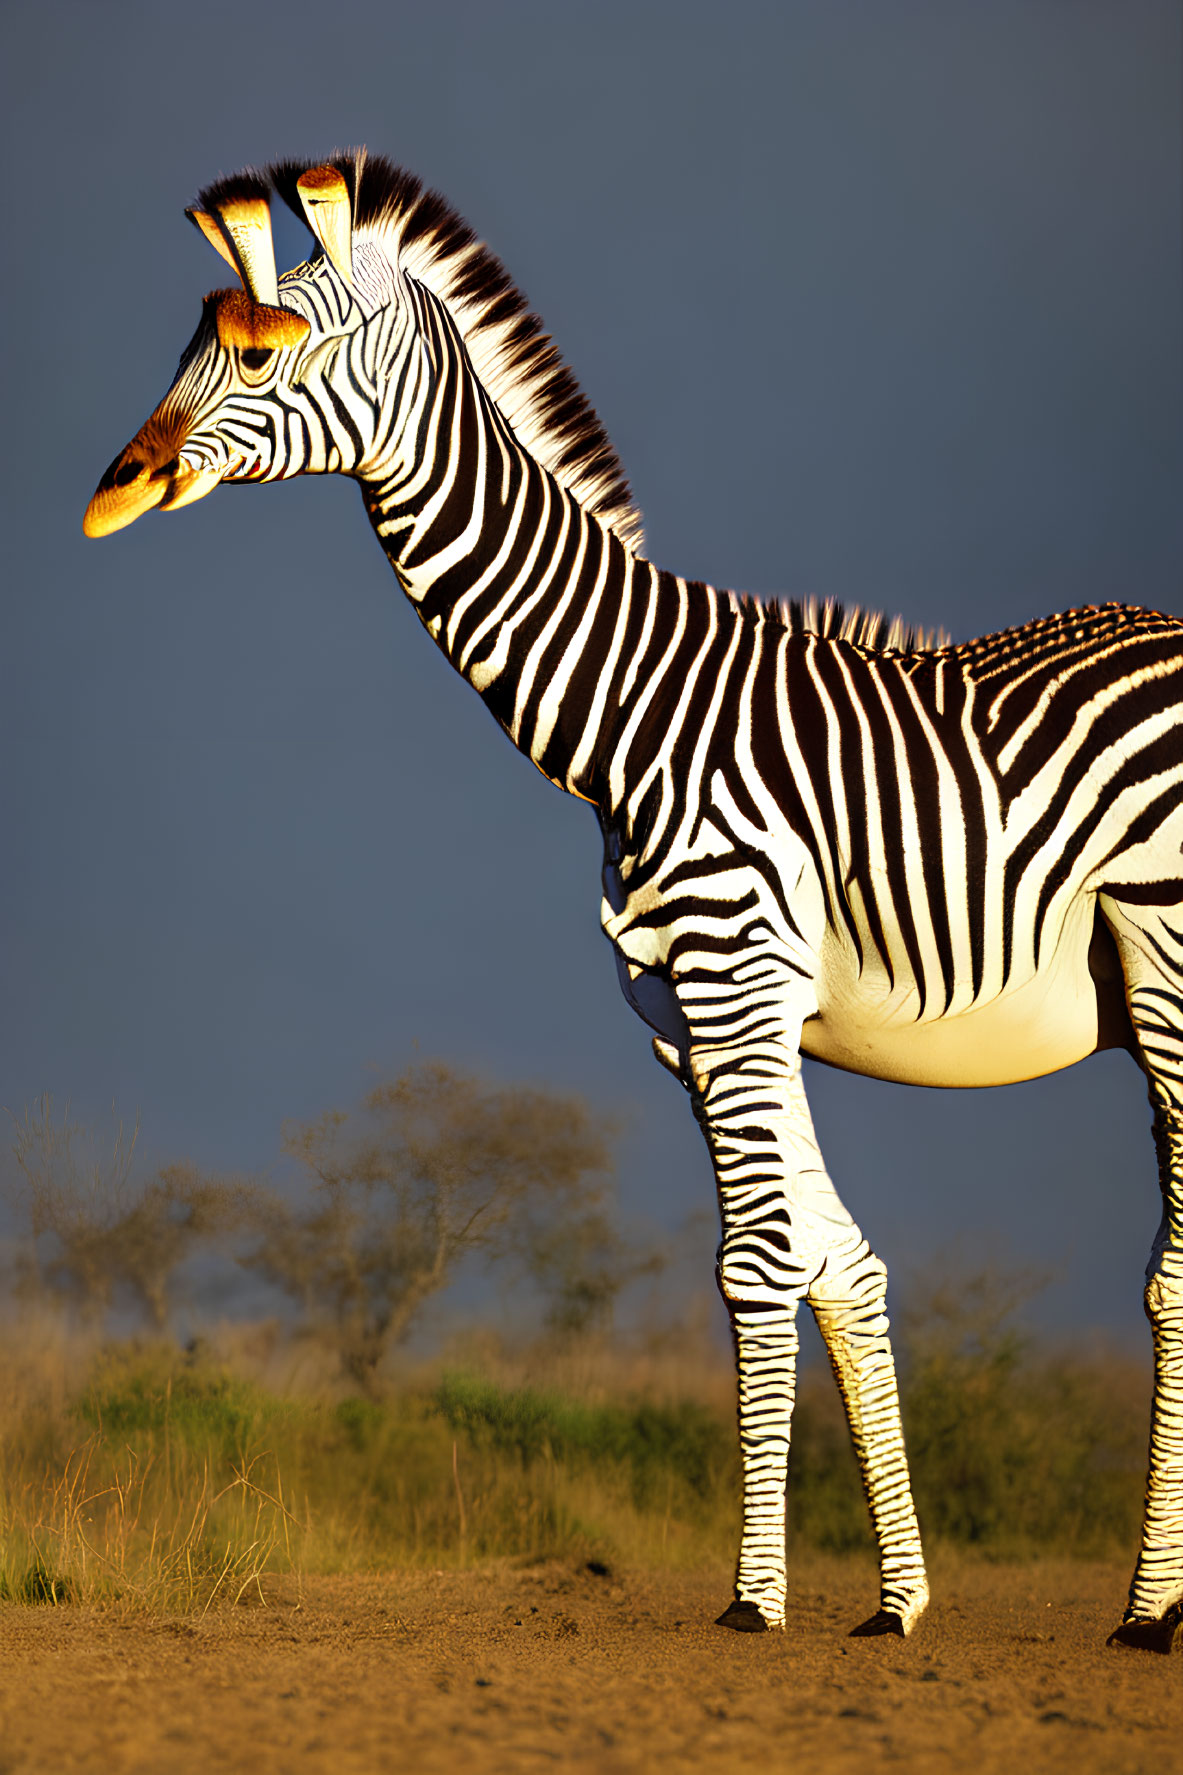 Unusually long-necked zebra in savannah at golden hour